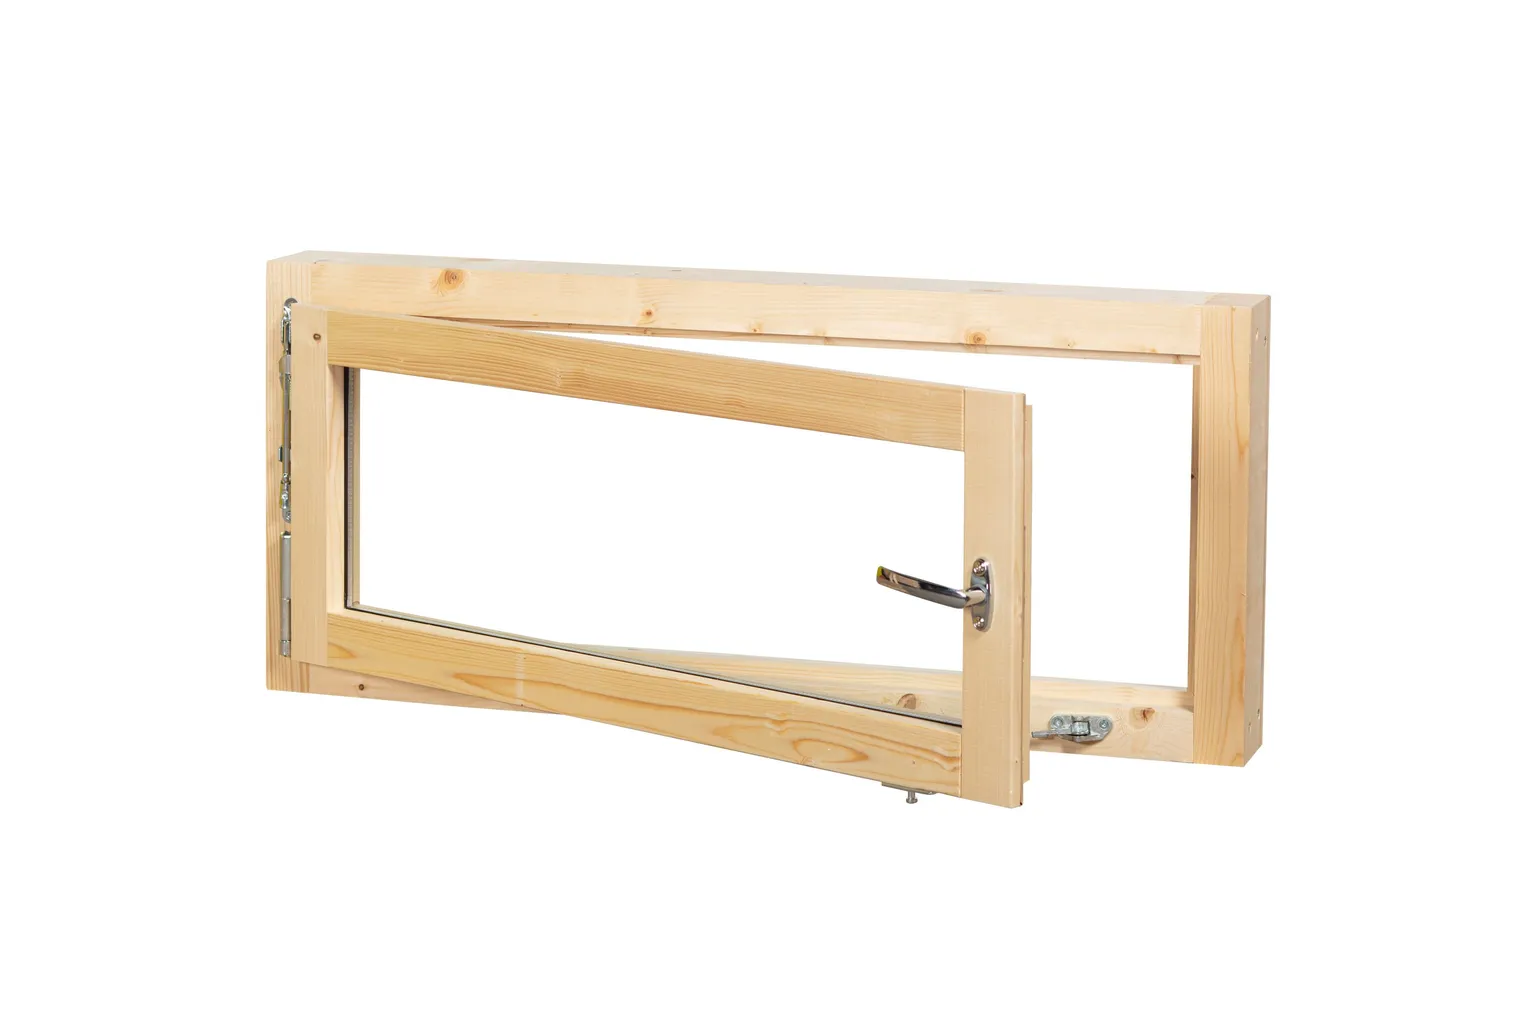 PUITAKEN NORDIC TIMBER PRODUCTS 9X4 890X390MM